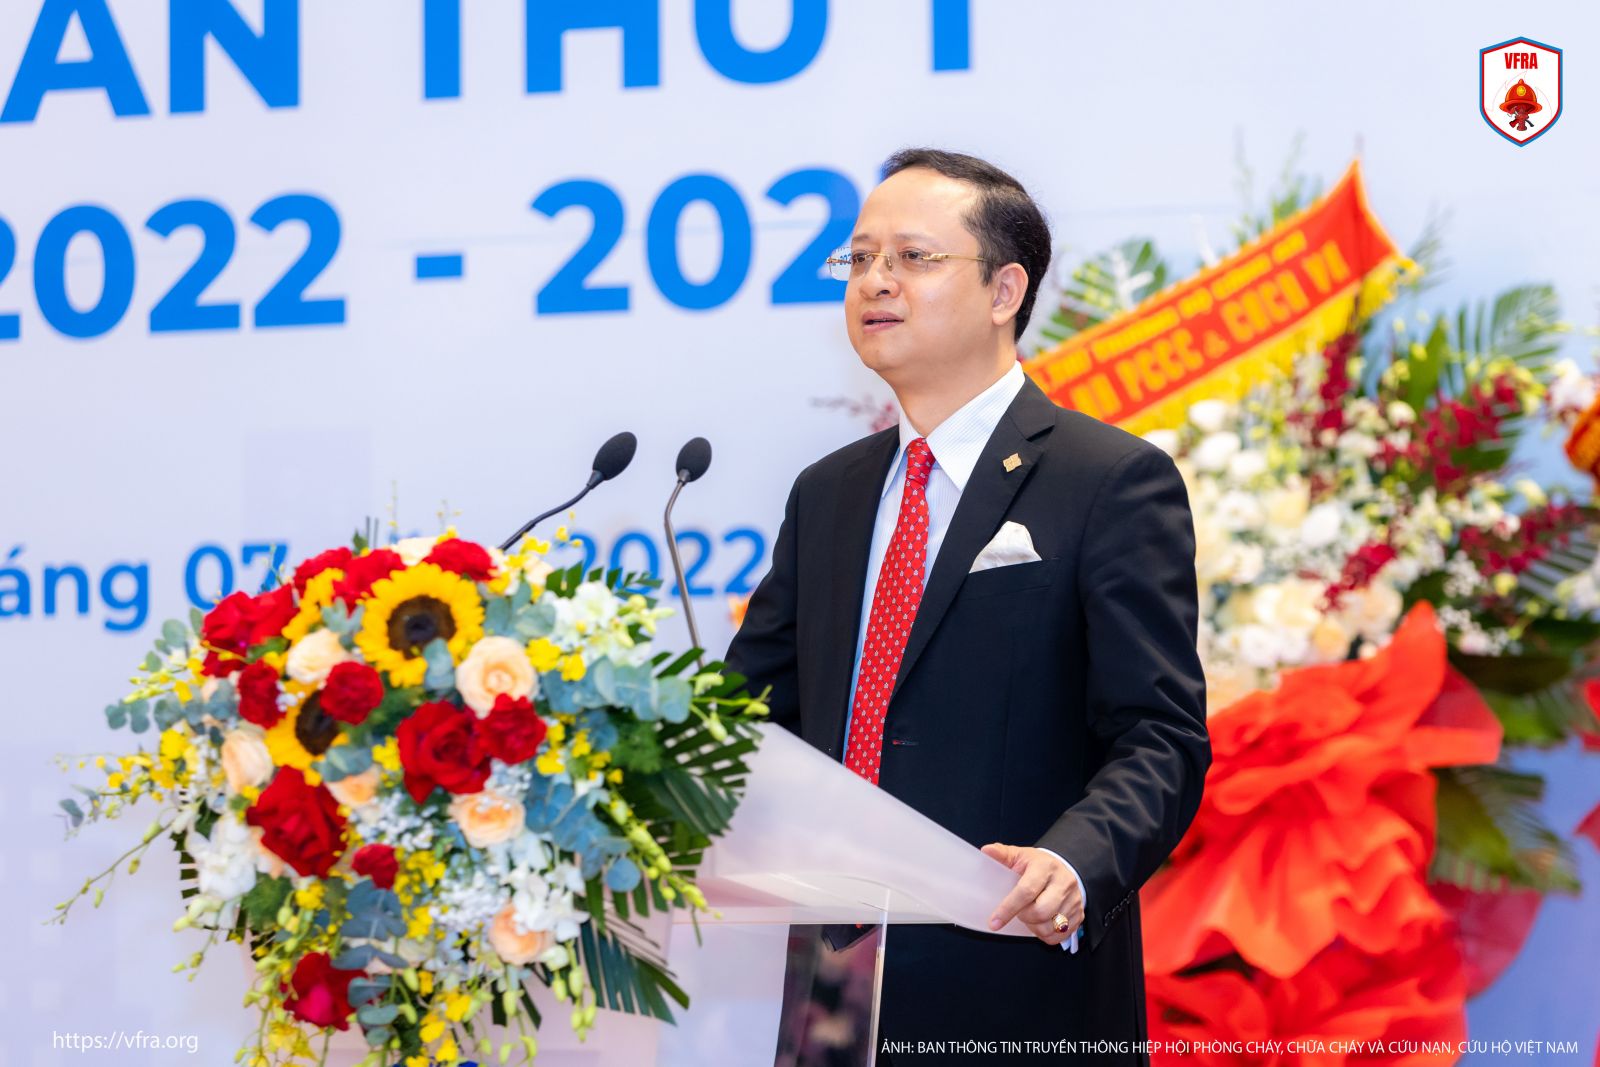 President of NDTC. Companies is elected as Chairman of Vietnam Fire & Rescue Association for the term 2022-2027